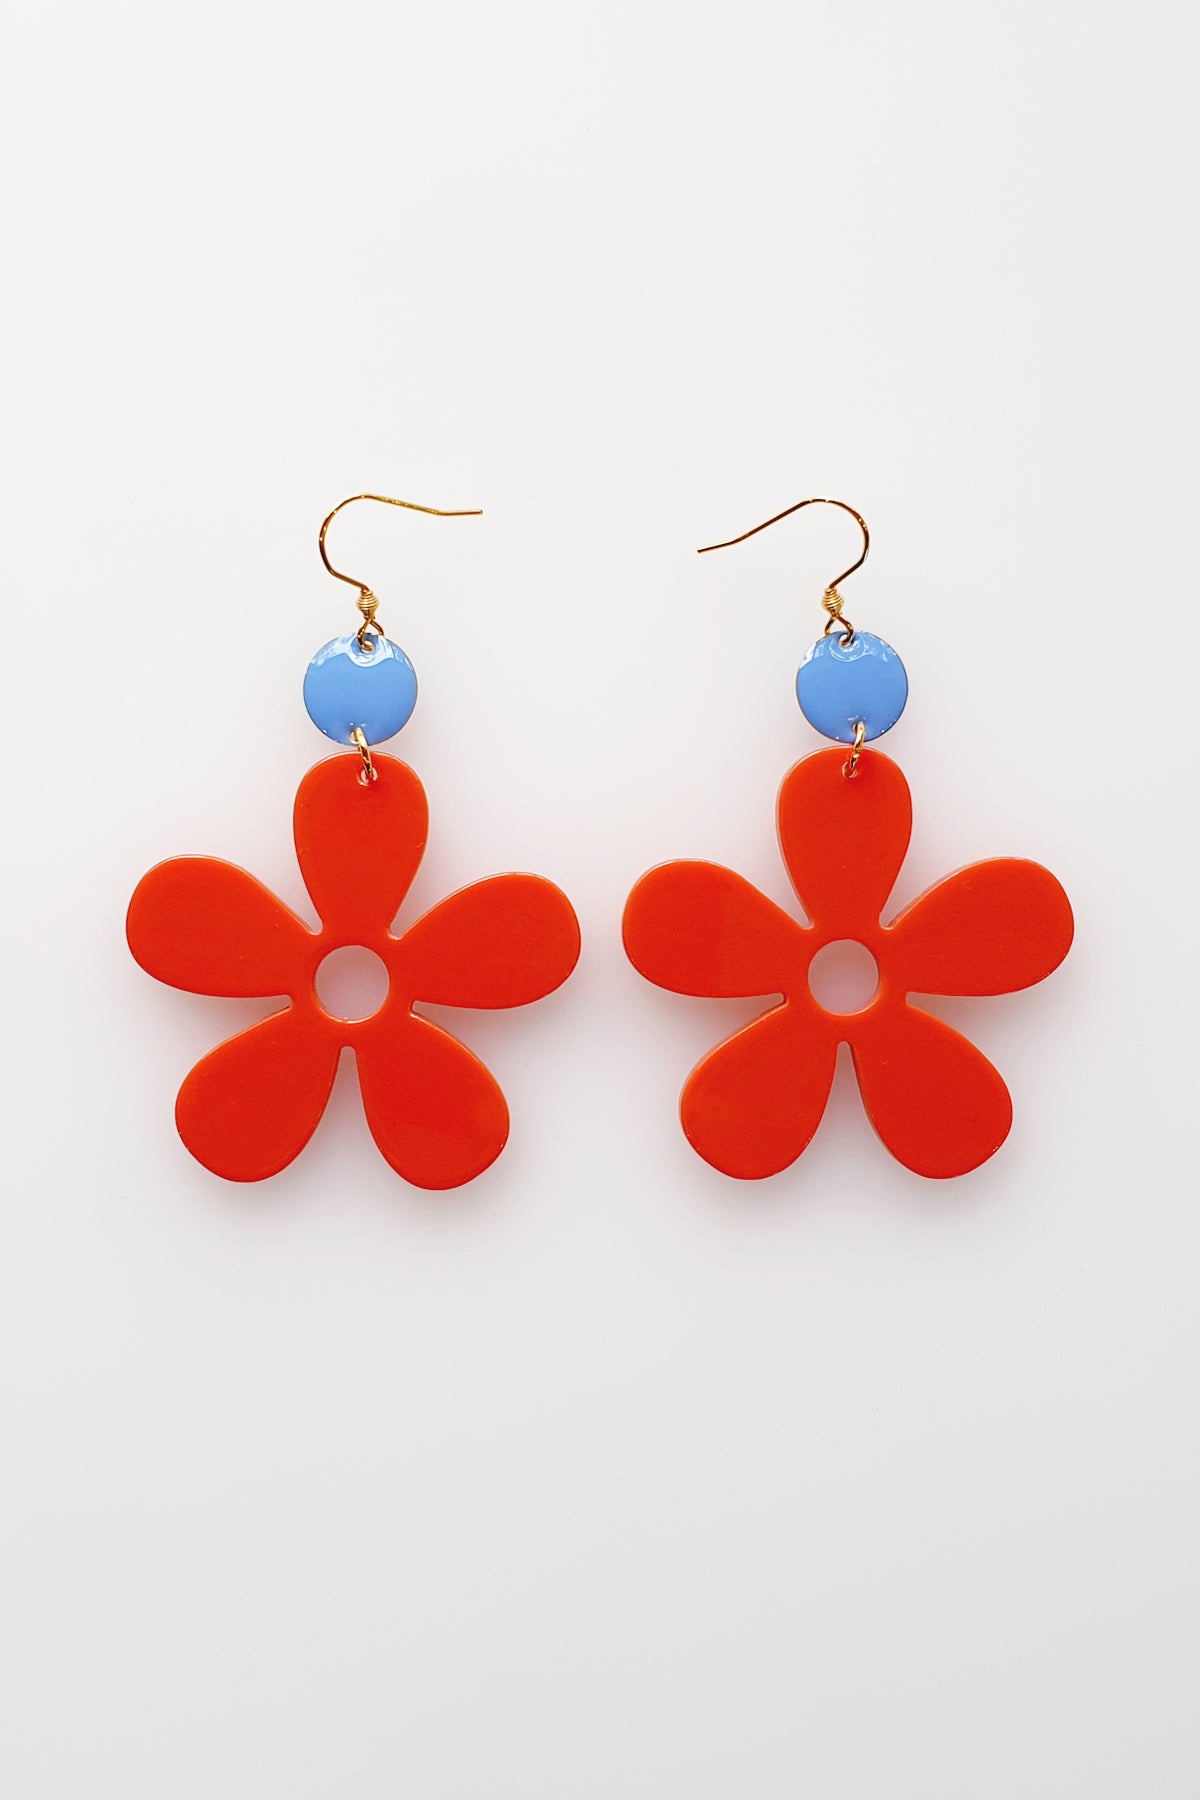 A pair of red acrylic daisy dangle earrings with a blue enamel dot attached to a hook. Pictured against a white background.